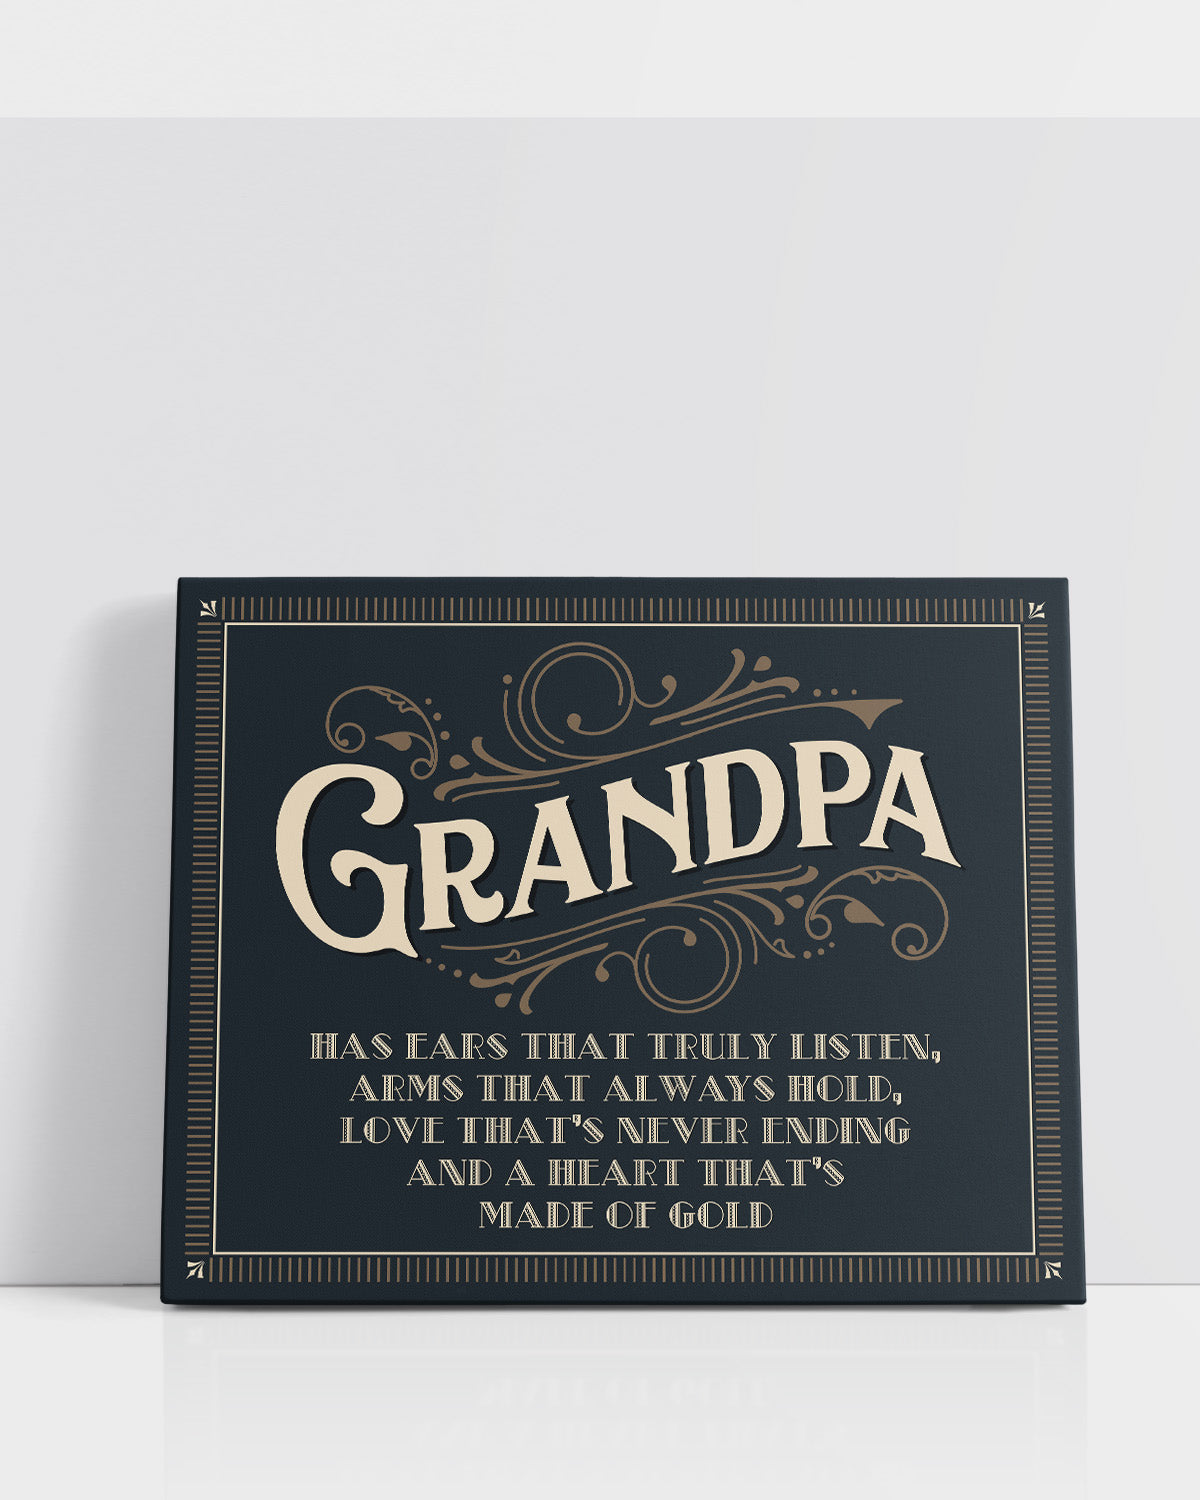 Grandpa Wall Art from Grandkids - Grandparents Day Gift Ideas - Best Gifts for Grandfather Wall Decor - Grandparent Gift - Gifts for Grandpa